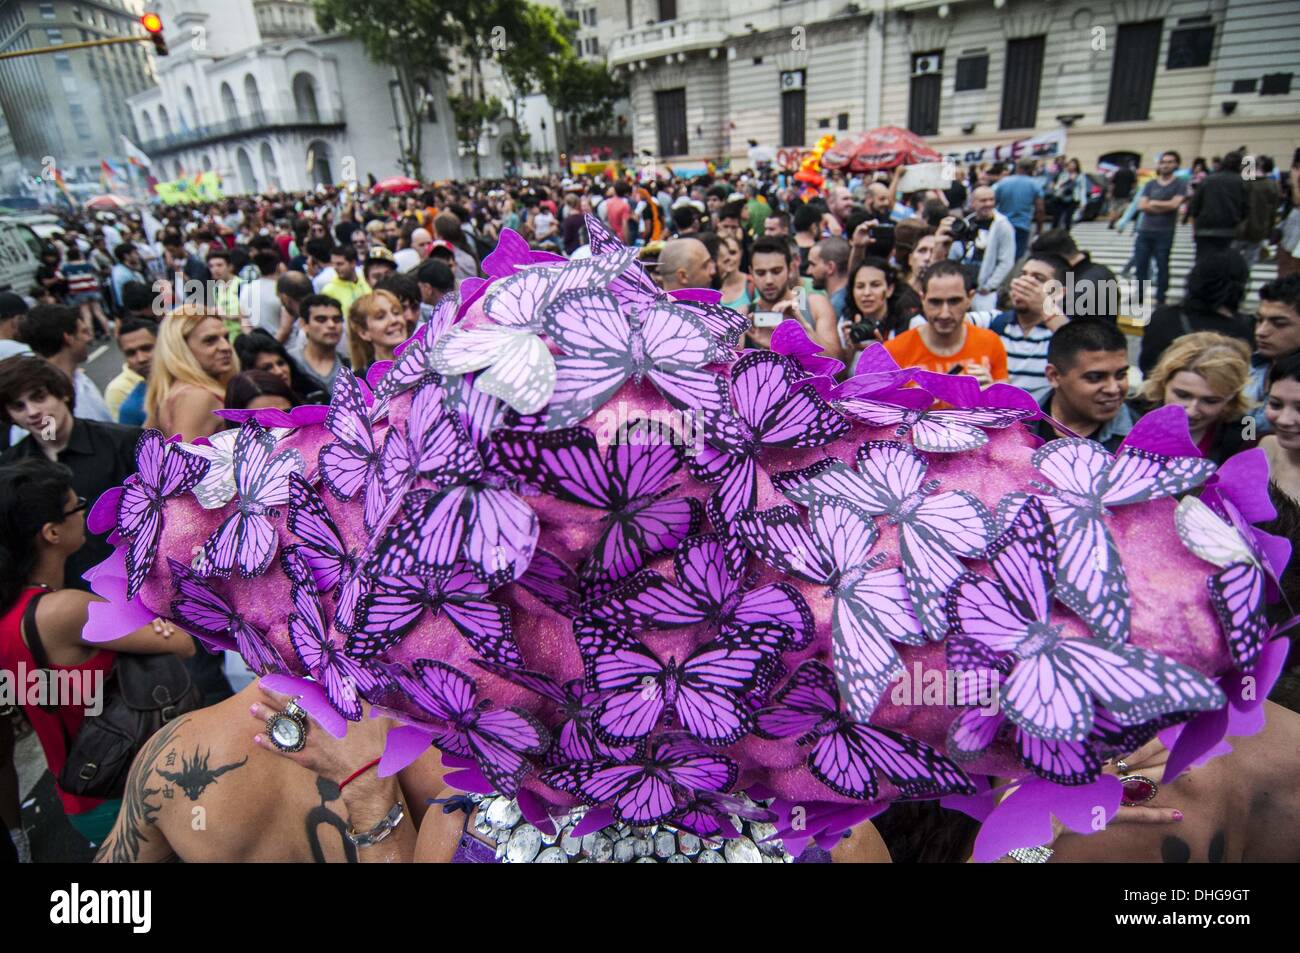 Buenos Aires, Buenos Aires, Argentina. 9th Nov, 2013. Wearing a butterfly wig, a man poses for pictures at the start of the XXII Buenos Aires LBGTIQ Pride Parade, which summoned, as each year, a crowd of tens of thousands who marched from Plaza de Mayo to the National Congress. © Patricio Murphy/ZUMAPRESS.com/Alamy Live News Stock Photo